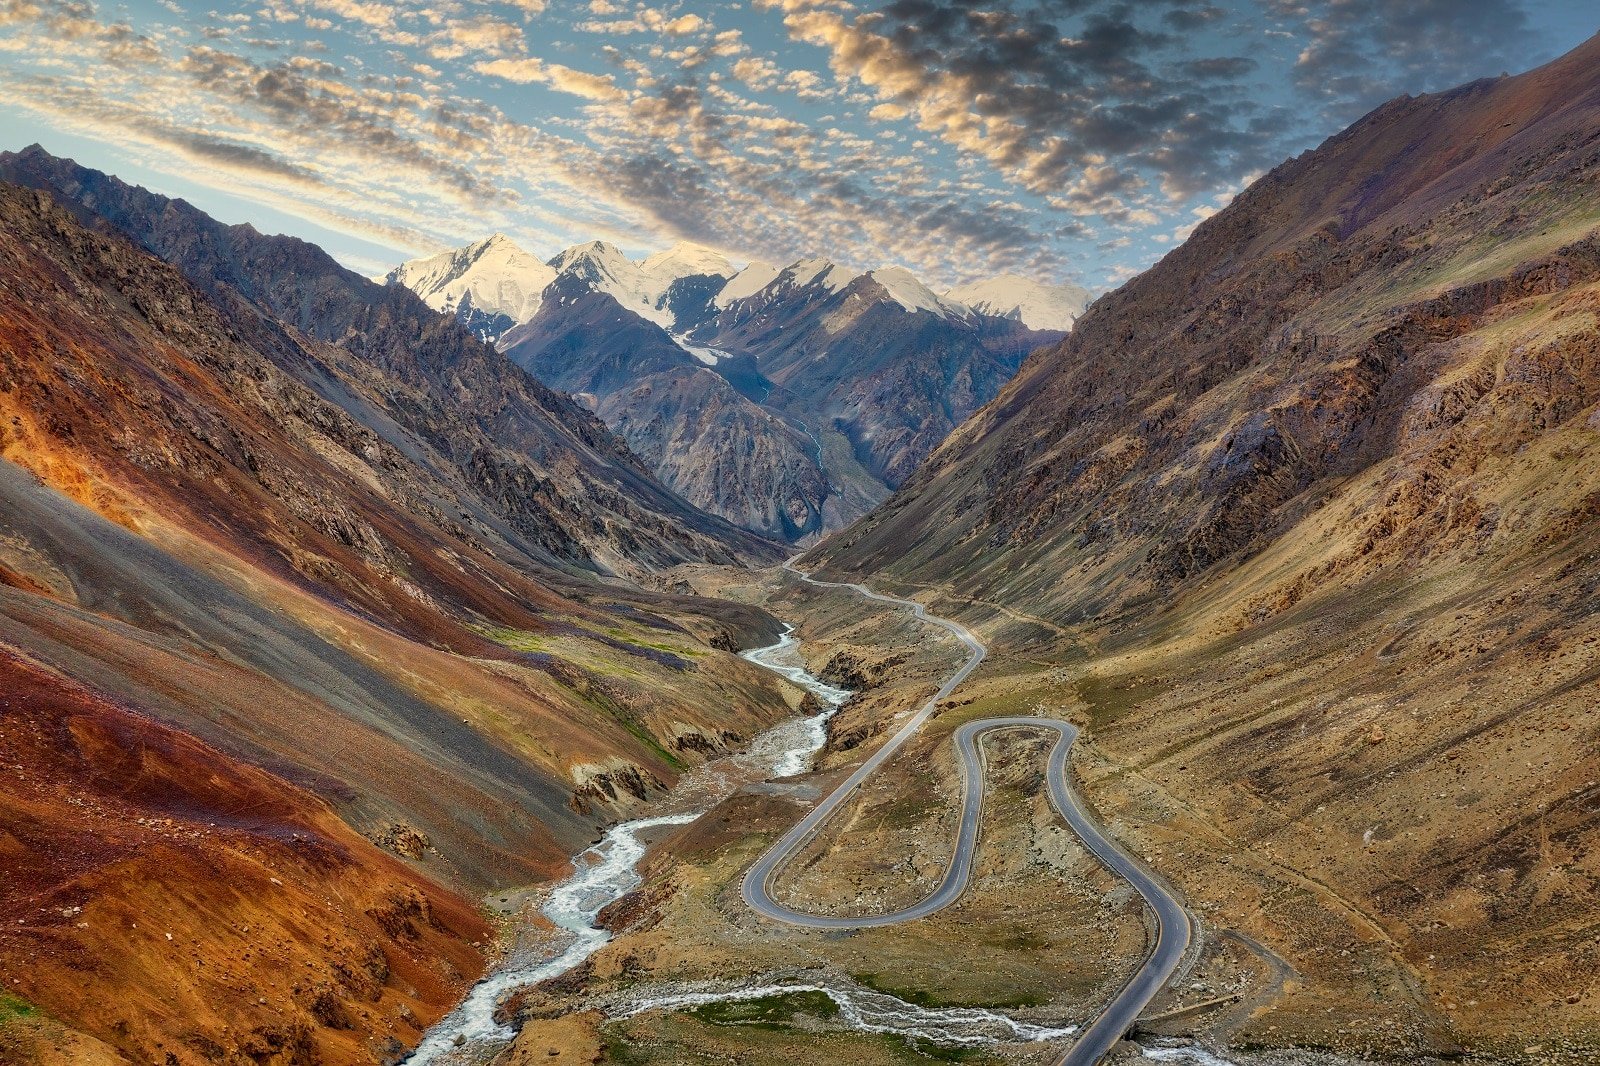 <p><span>The Karakoram Highway connects Pakistan and China through the Karakoram Range. This route offers views of peaks like K2 and a blend of cultures. The highway is a testament to engineering in challenging terrain, providing a journey through history and diverse regional cultures.</span></p> <p><b>Insider’s Tip: </b><span>Be prepared for high altitudes and carry necessary permits for border crossings. </span></p> <p><b>When to Travel: </b><span>May to October, to avoid heavy snowfall and road closures. </span></p> <p><b>How to Get There: </b><span>Start from Islamabad, Pakistan, and head towards the Chinese border.</span></p>